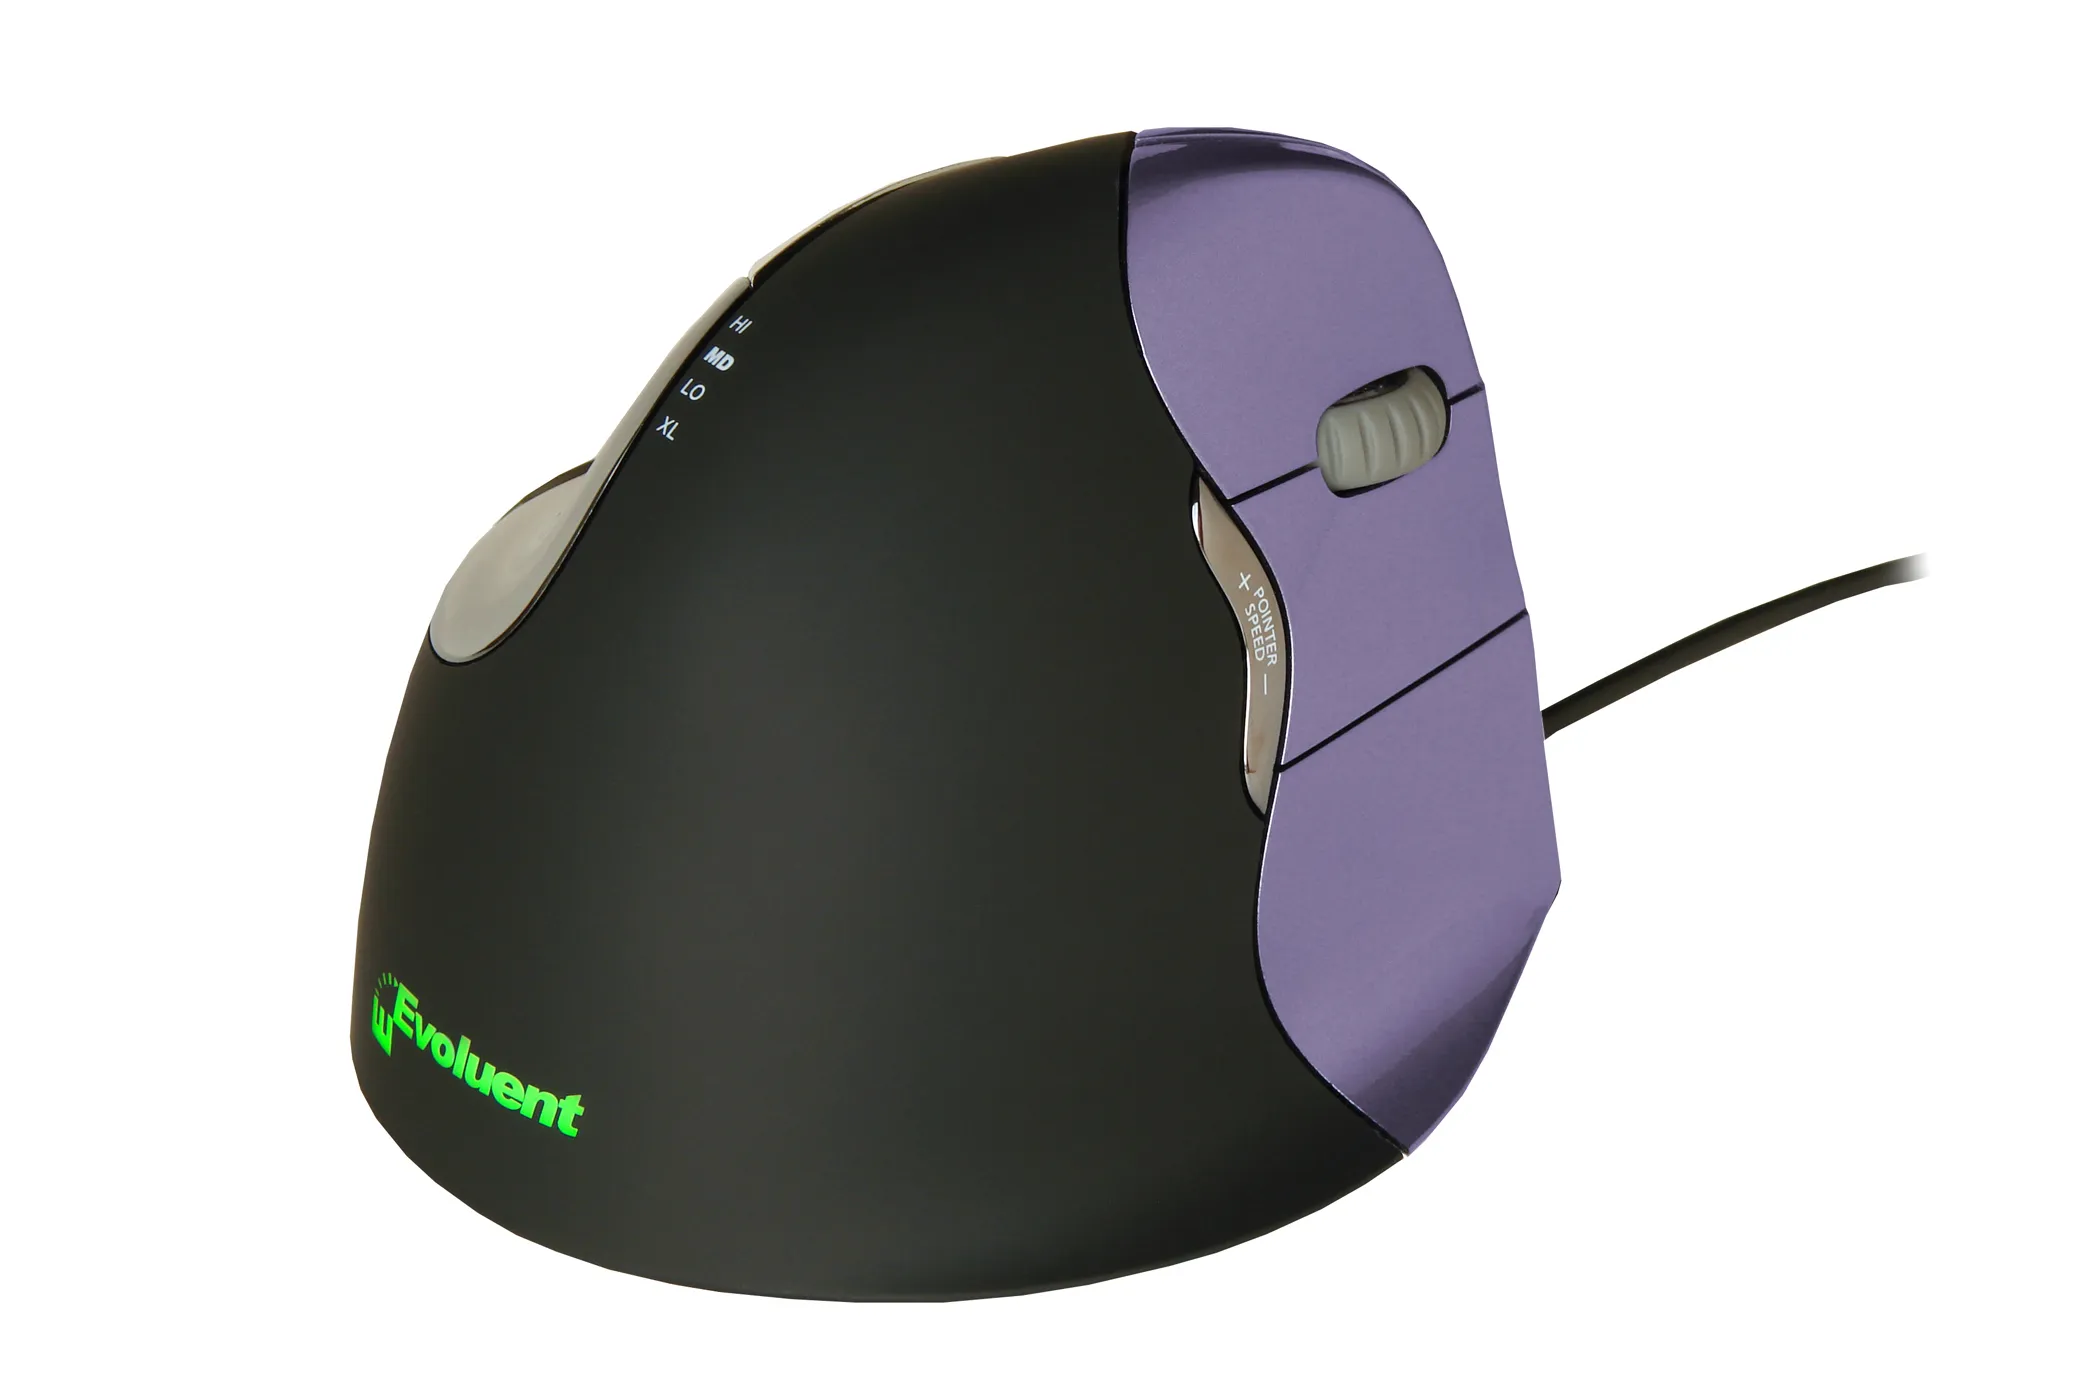 Achat BakkerElkhuizen Evoluent4 Mouse Small (Right Hand sur hello RSE